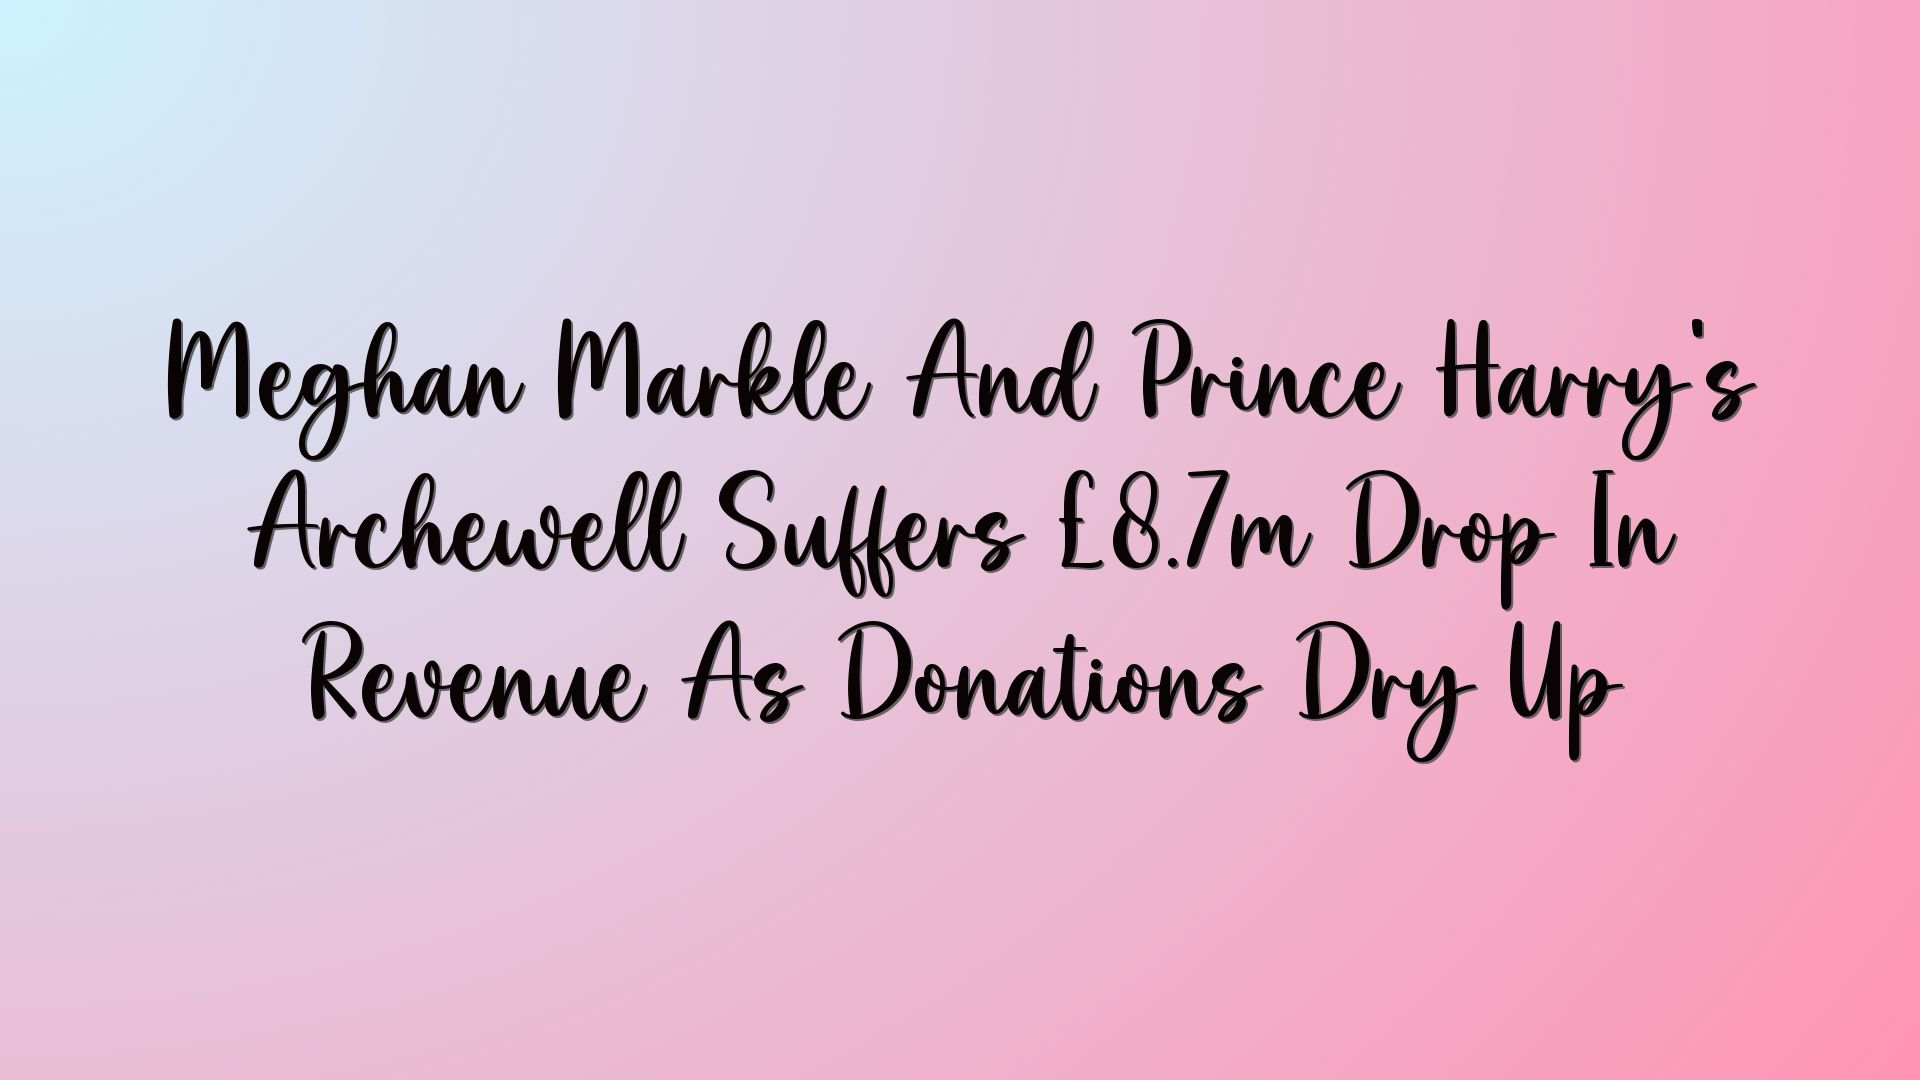 Meghan Markle And Prince Harry’s Archewell Suffers £8.7m Drop In Revenue As Donations Dry Up